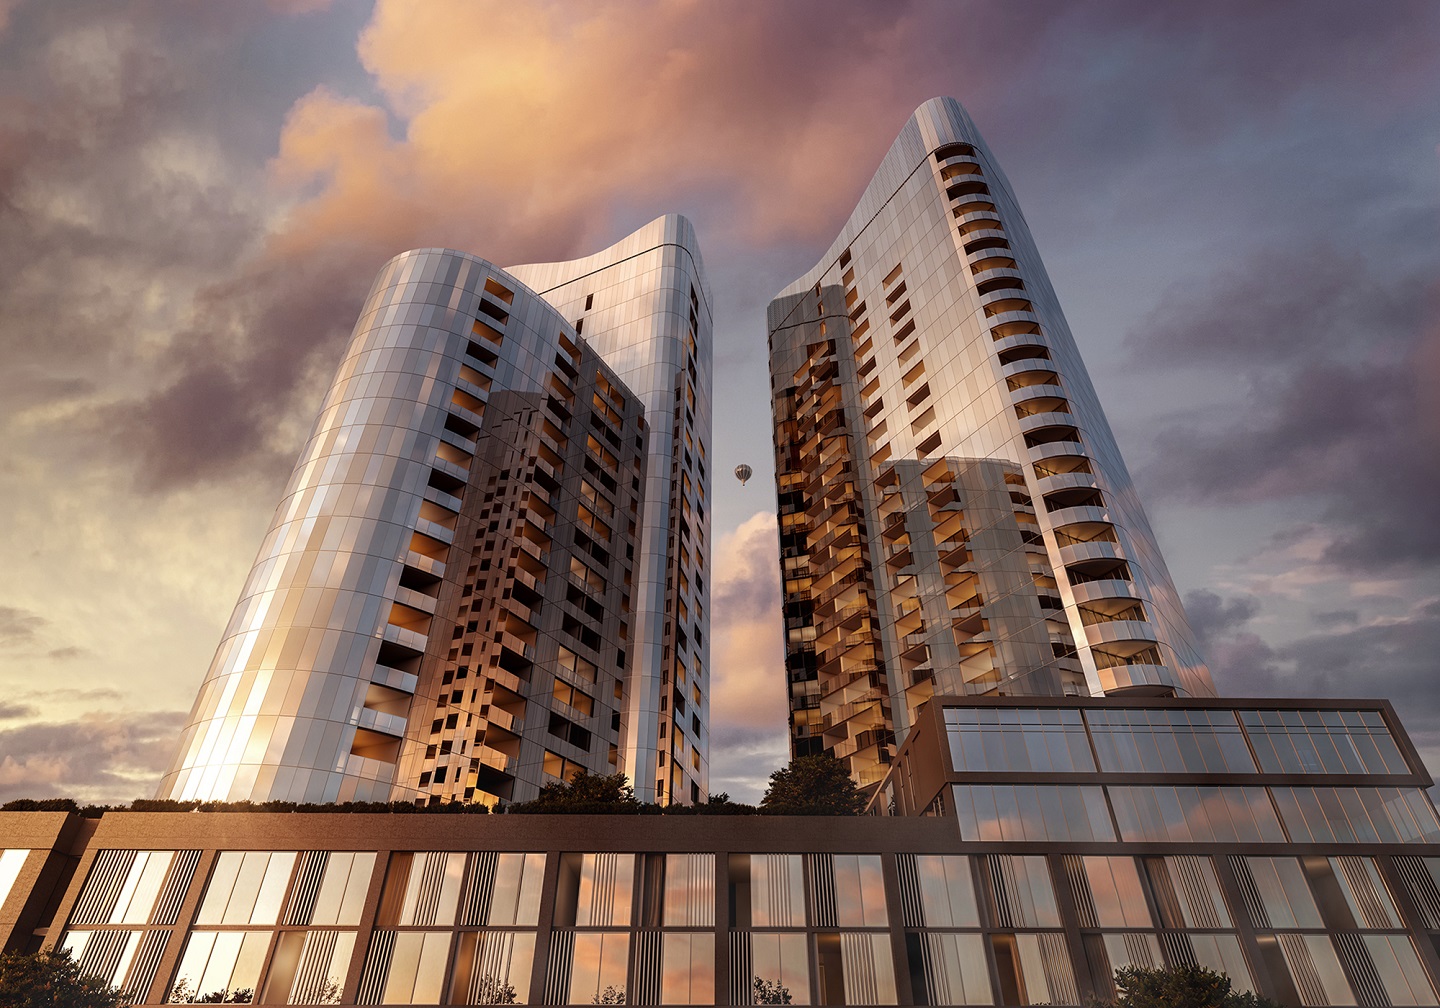 Hera to design the two highest towers in Canberra in keeping with Value  Engineering - Hera Engineering